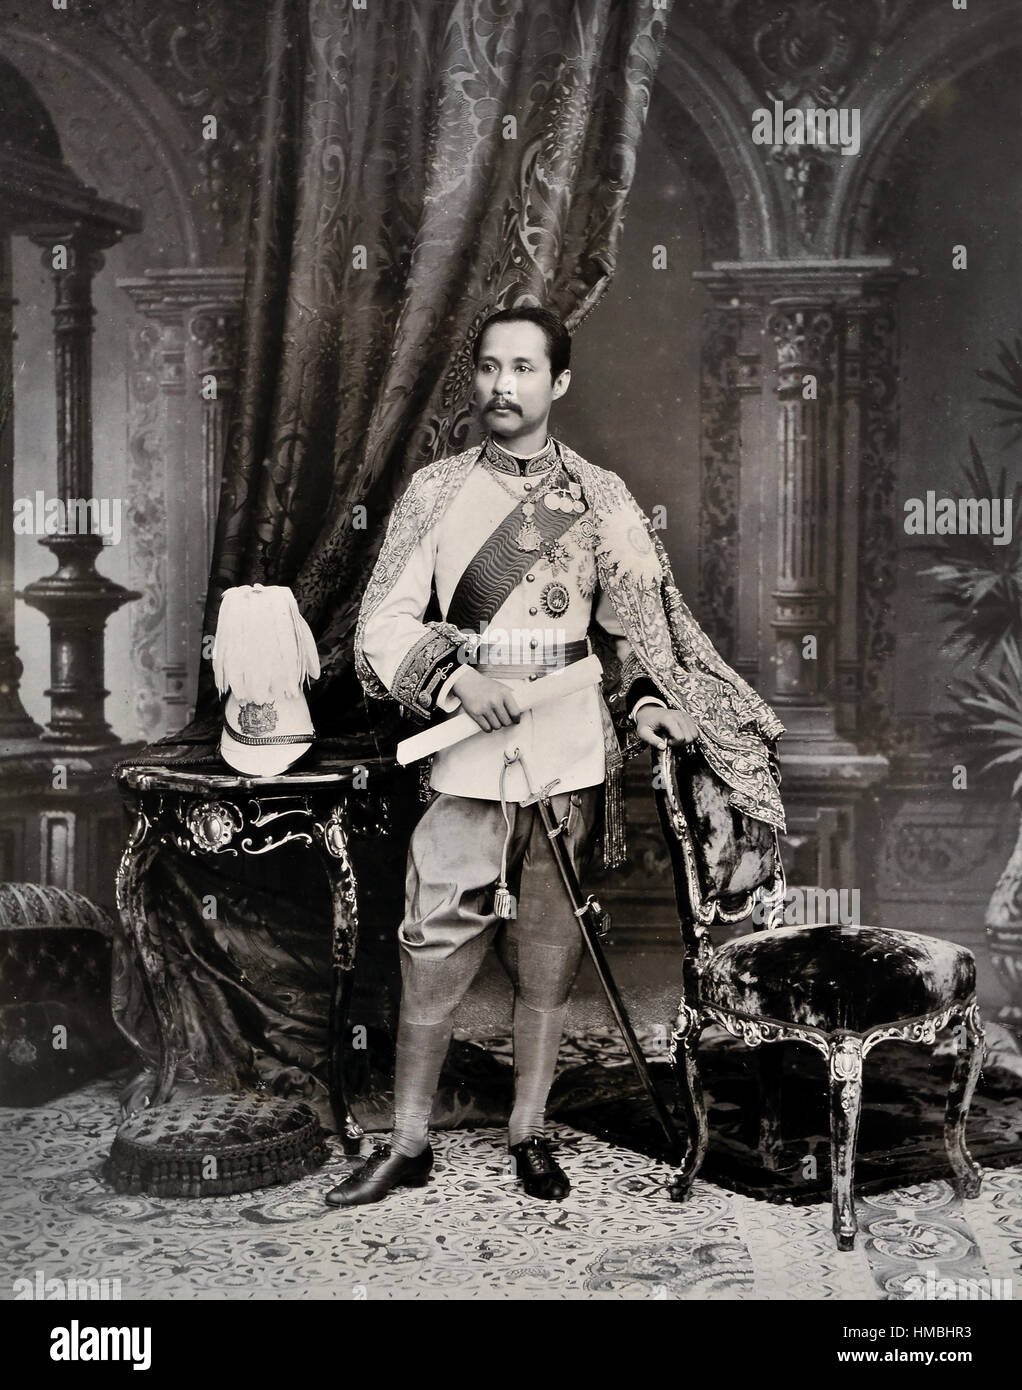 Phra Chula Chomklao Chaoyuhua, 1853 - 1910, better known as Rama V or King Chulalongkorn the Great, was the fifth king (Rama) of the Chakri dynasty in Thailand. He reigned from 1868 - 1910 Thailand, Siam,Thai, Stock Photo